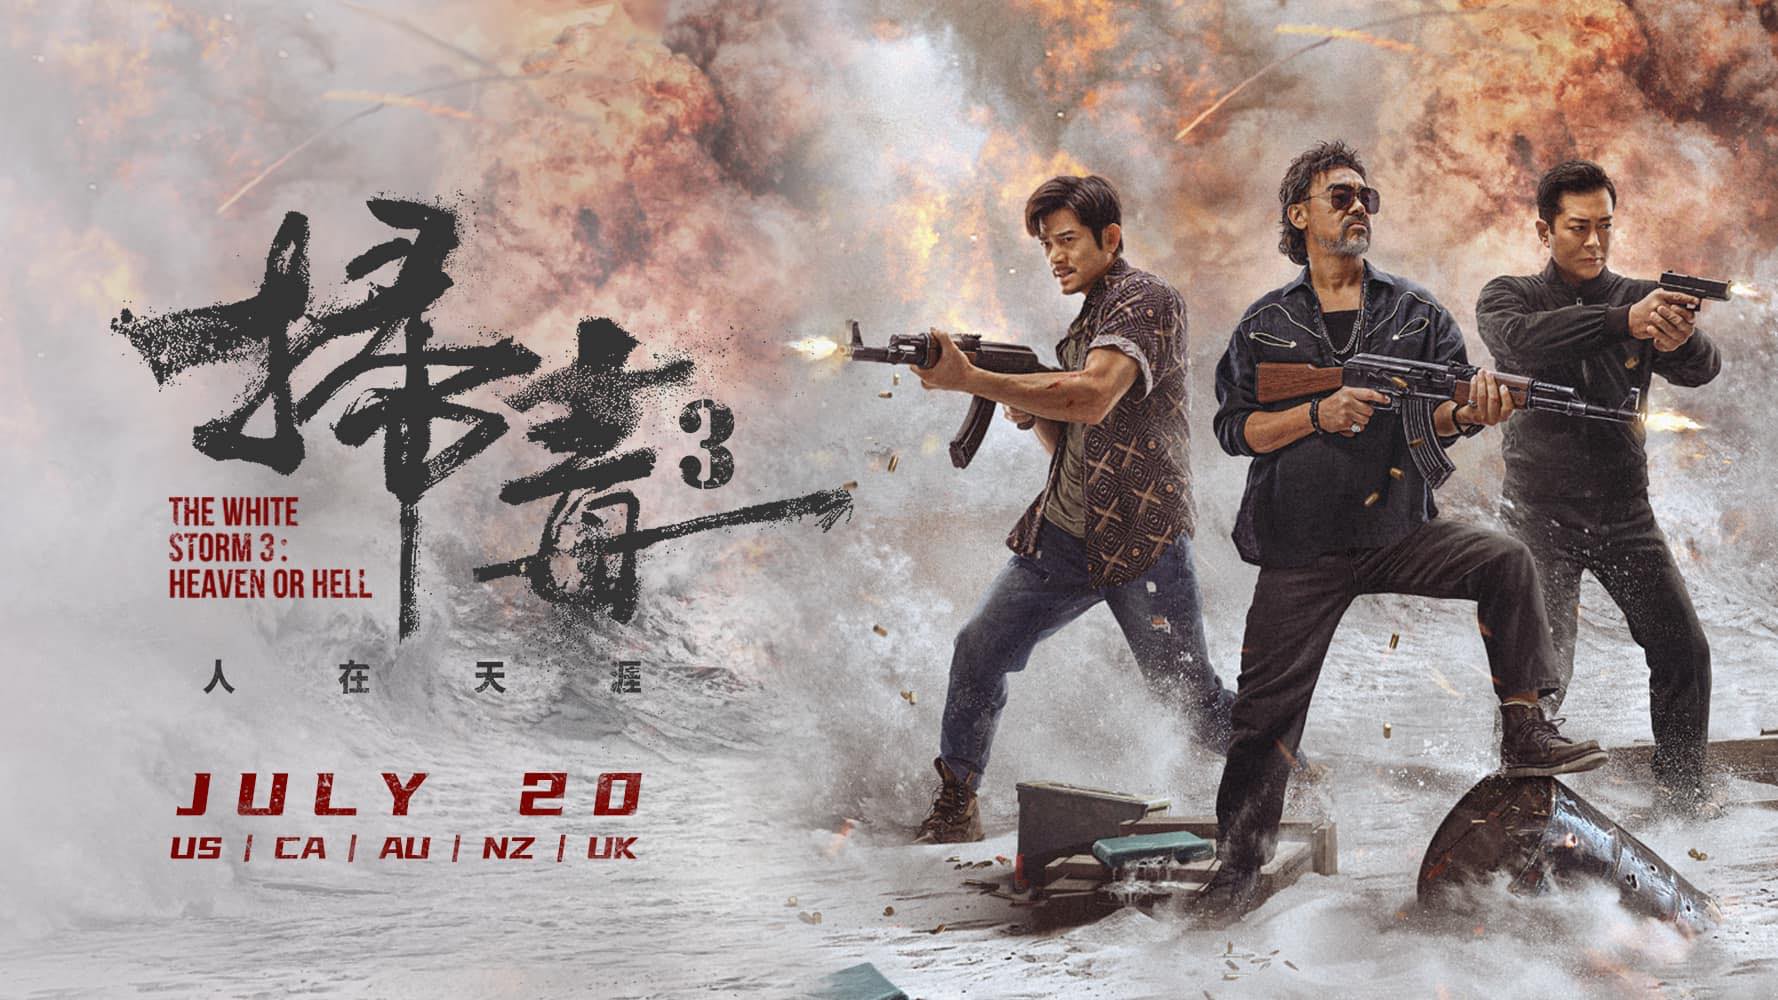 Hong Kong Movie ‘The White Storm 3: Heaven or Hell’ In Theatres On July 20